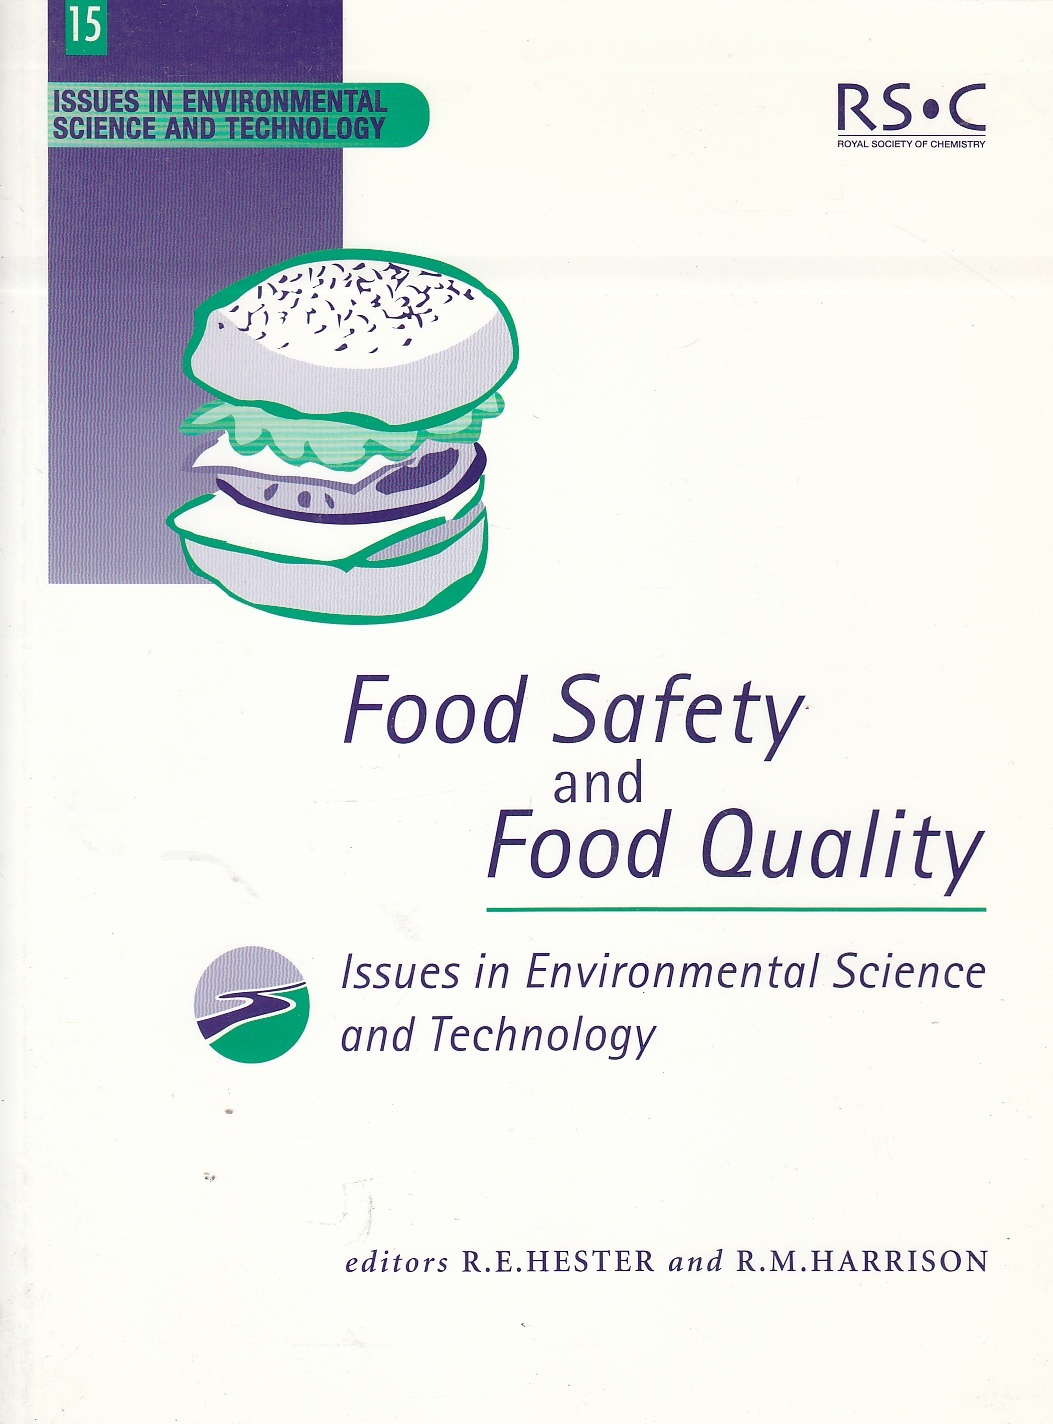 Image for Food Safety and Food Quality Issues in Environmental Science and Technology Volume 15